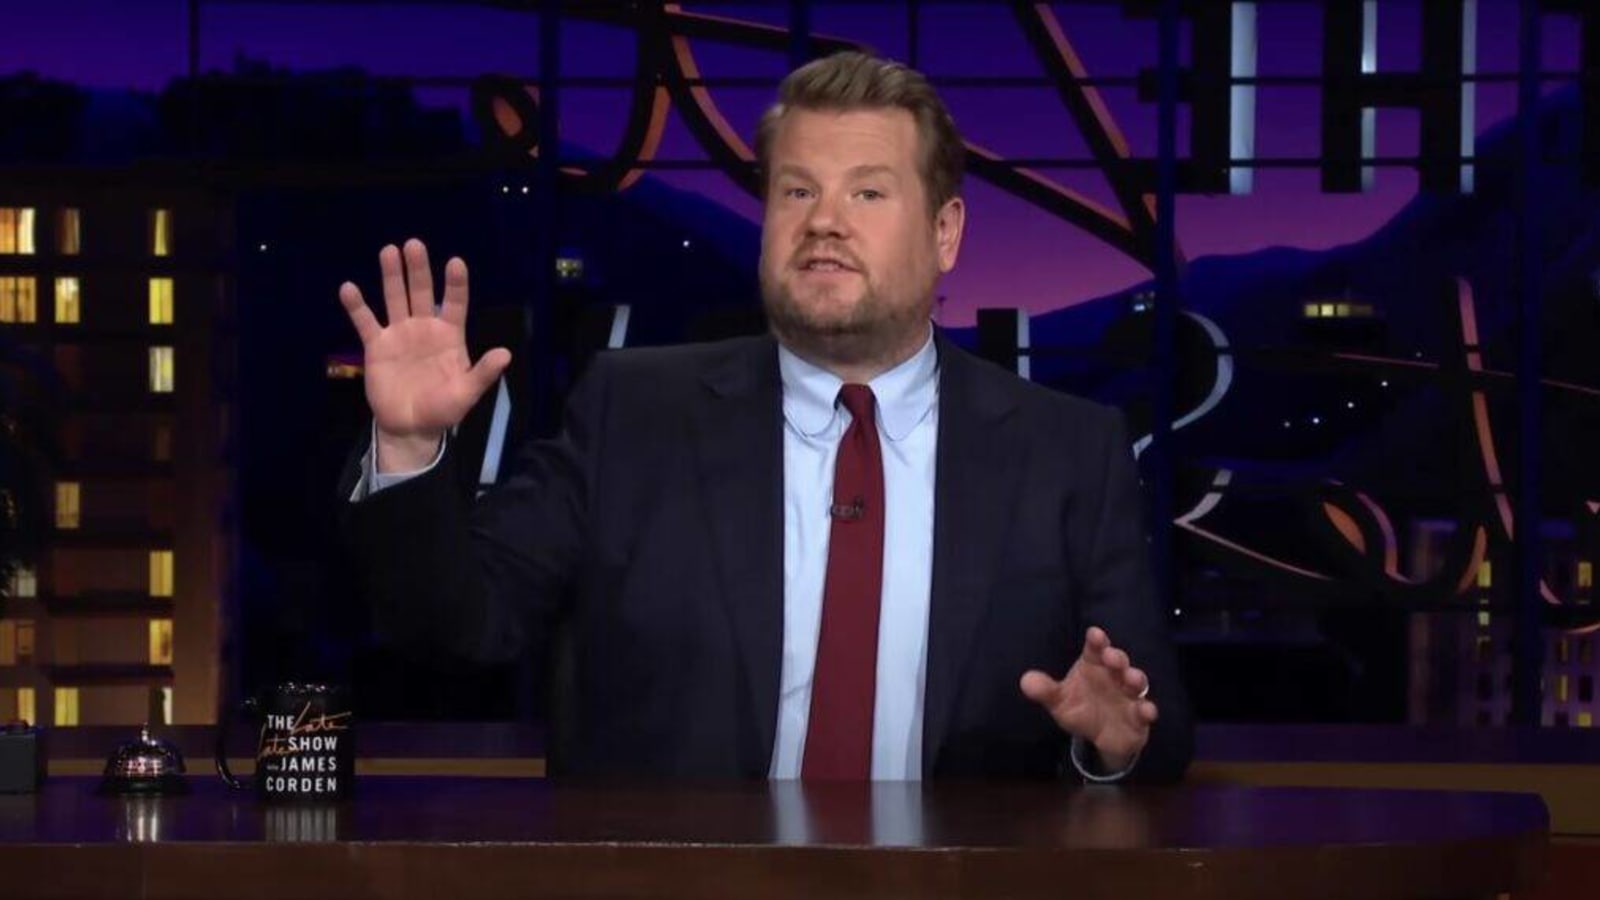 James Corden’s ‘Late Late Show’ was reportedly losing $20 million a year